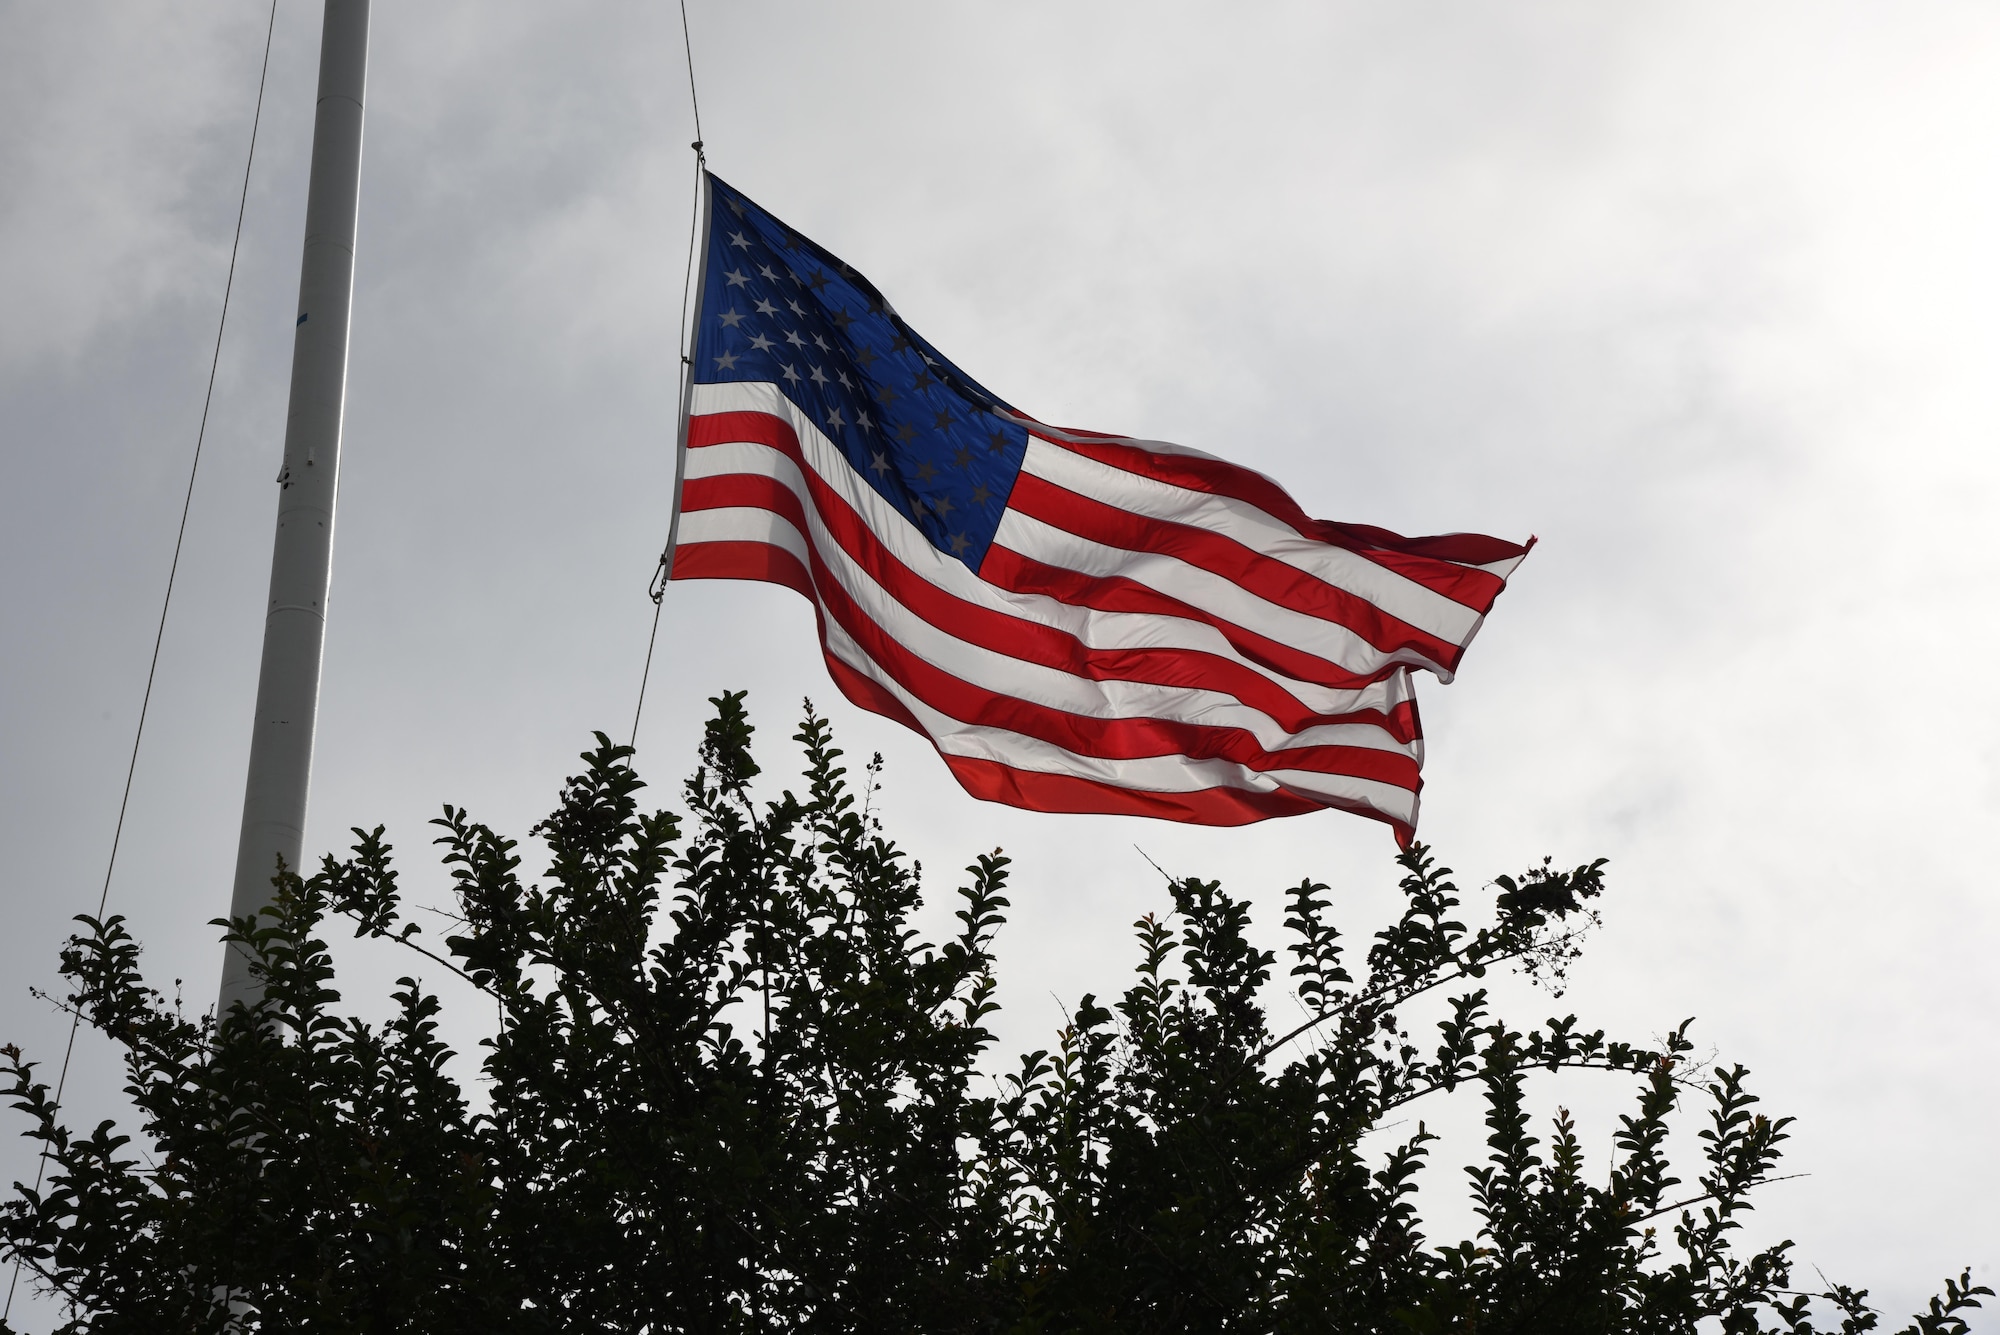 The U.S. Flag waves as it is lowered during the 81st Security Forces Squadron retreat ceremony May 18, 2017, on Keesler Air Force Base, Miss. The event was held during National Police Week, which recognizes the service of law enforcement men and women who put their lives at risk every day. (U.S. Air Force photo by Kemberly Groue)